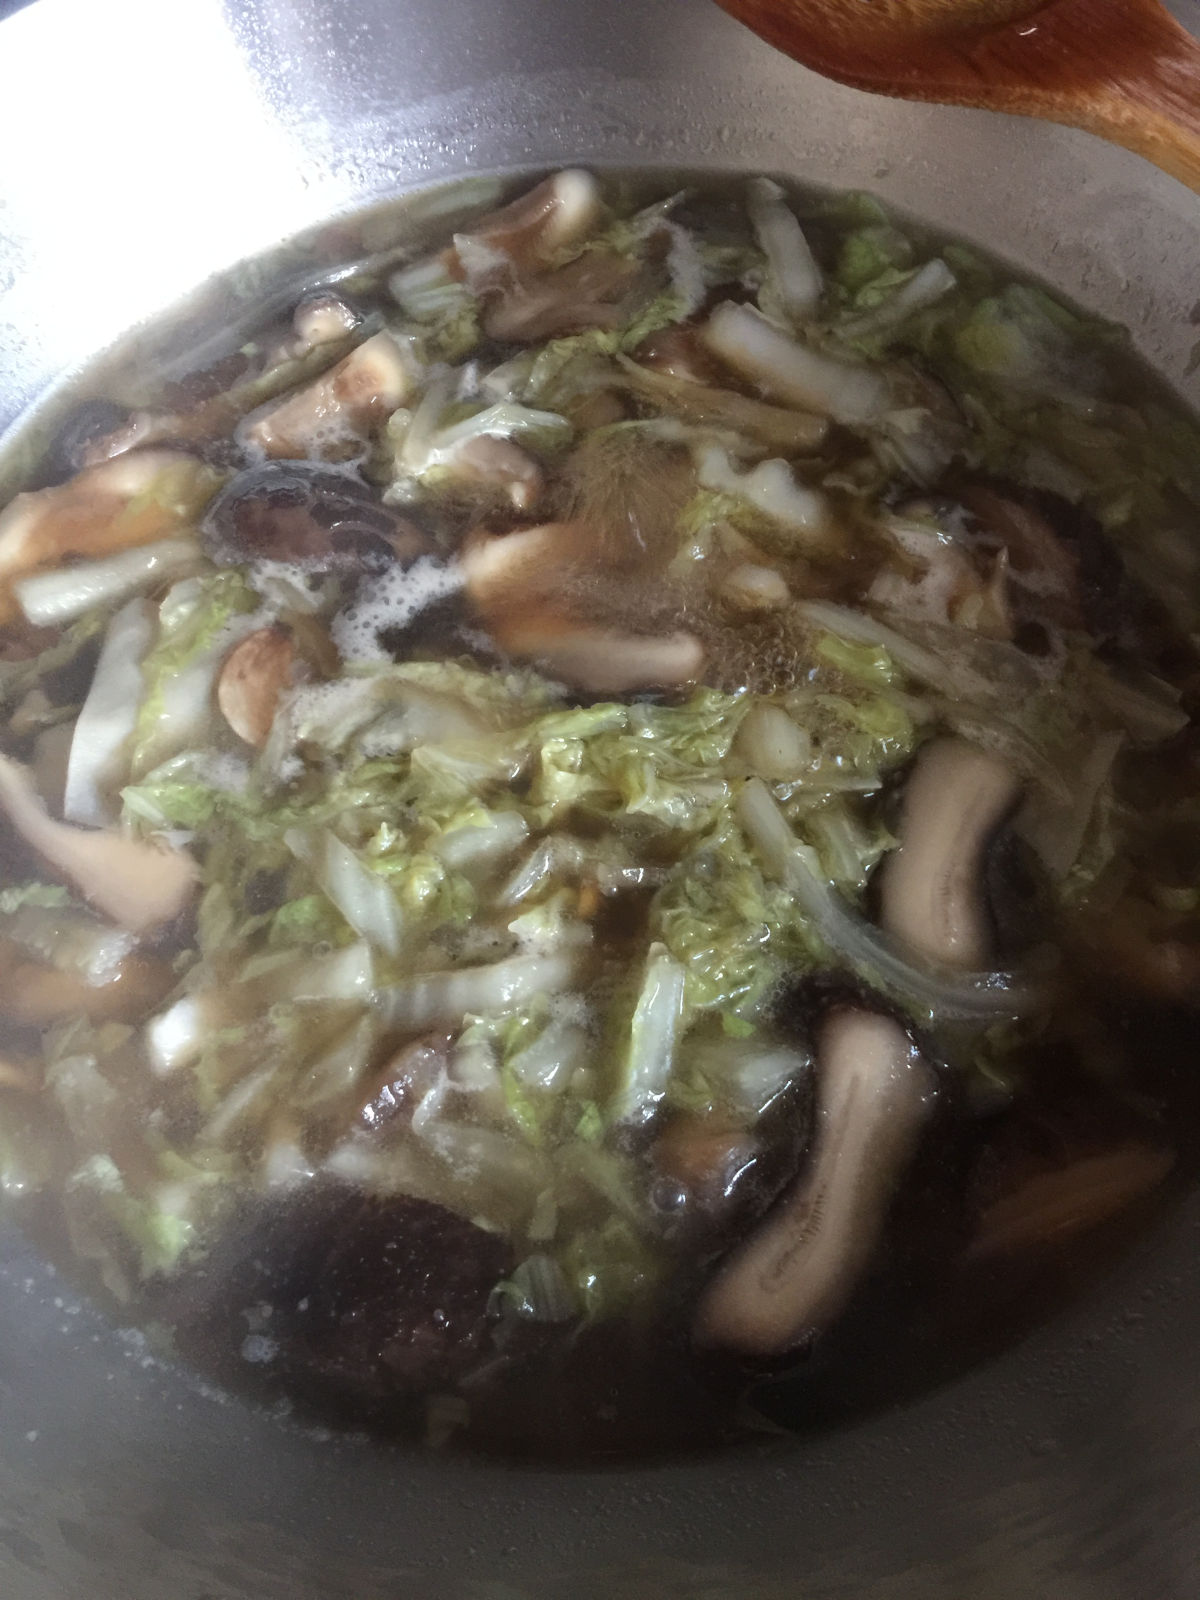 A close up view of vegetable soup with condiments (soy sauce, salt, sesame oil and sugar).